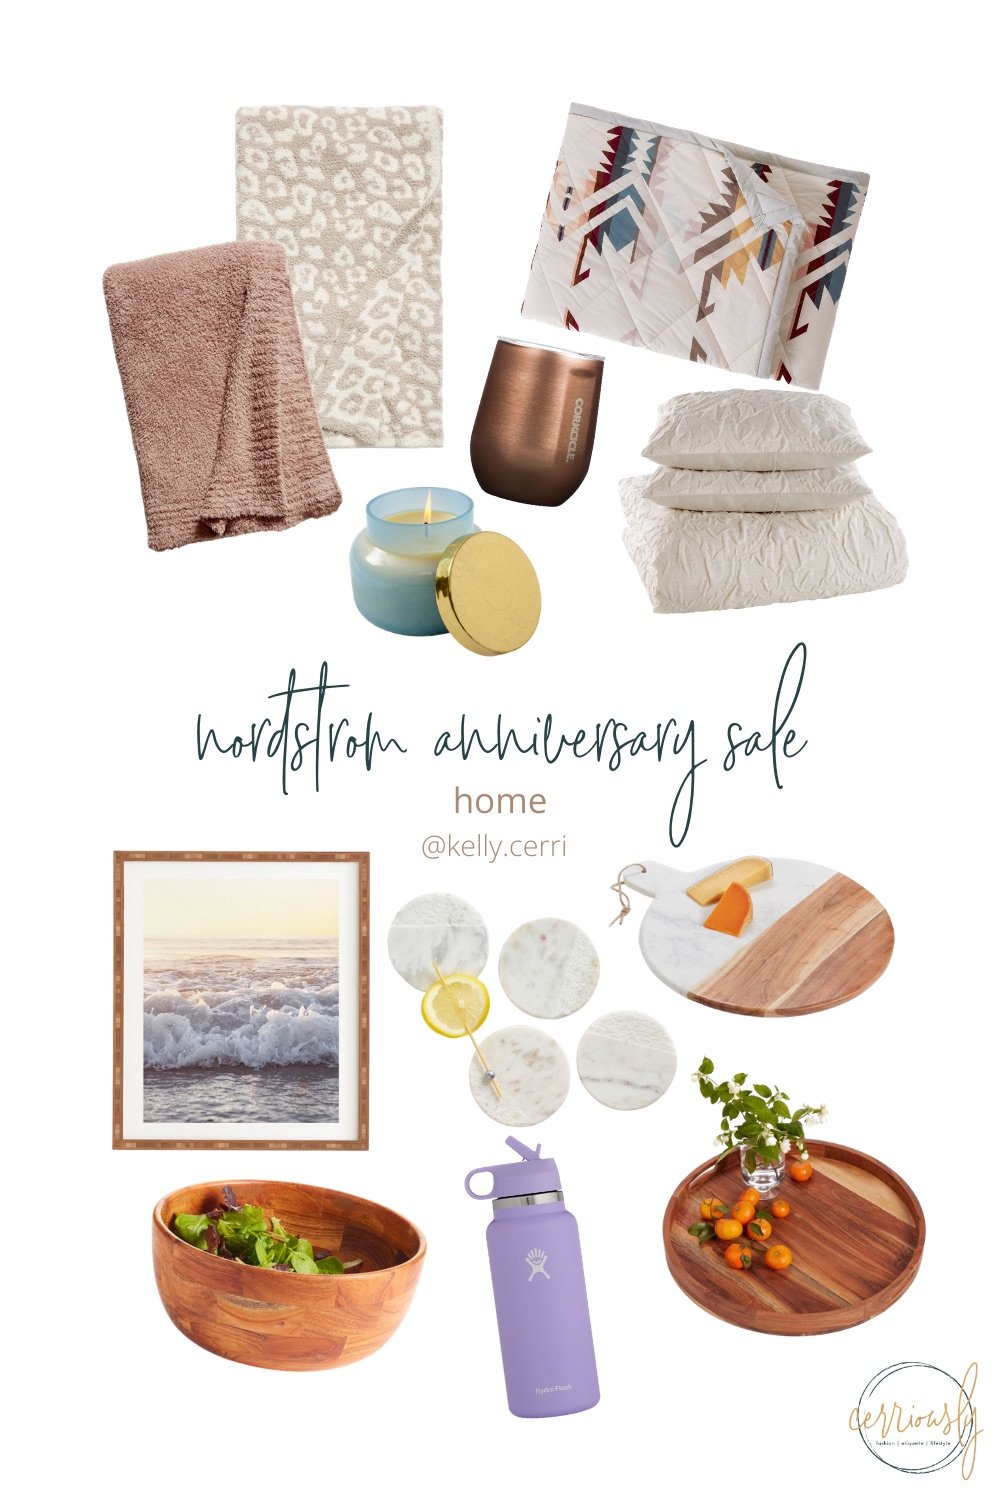 nordstrom anniversary sale finds - home